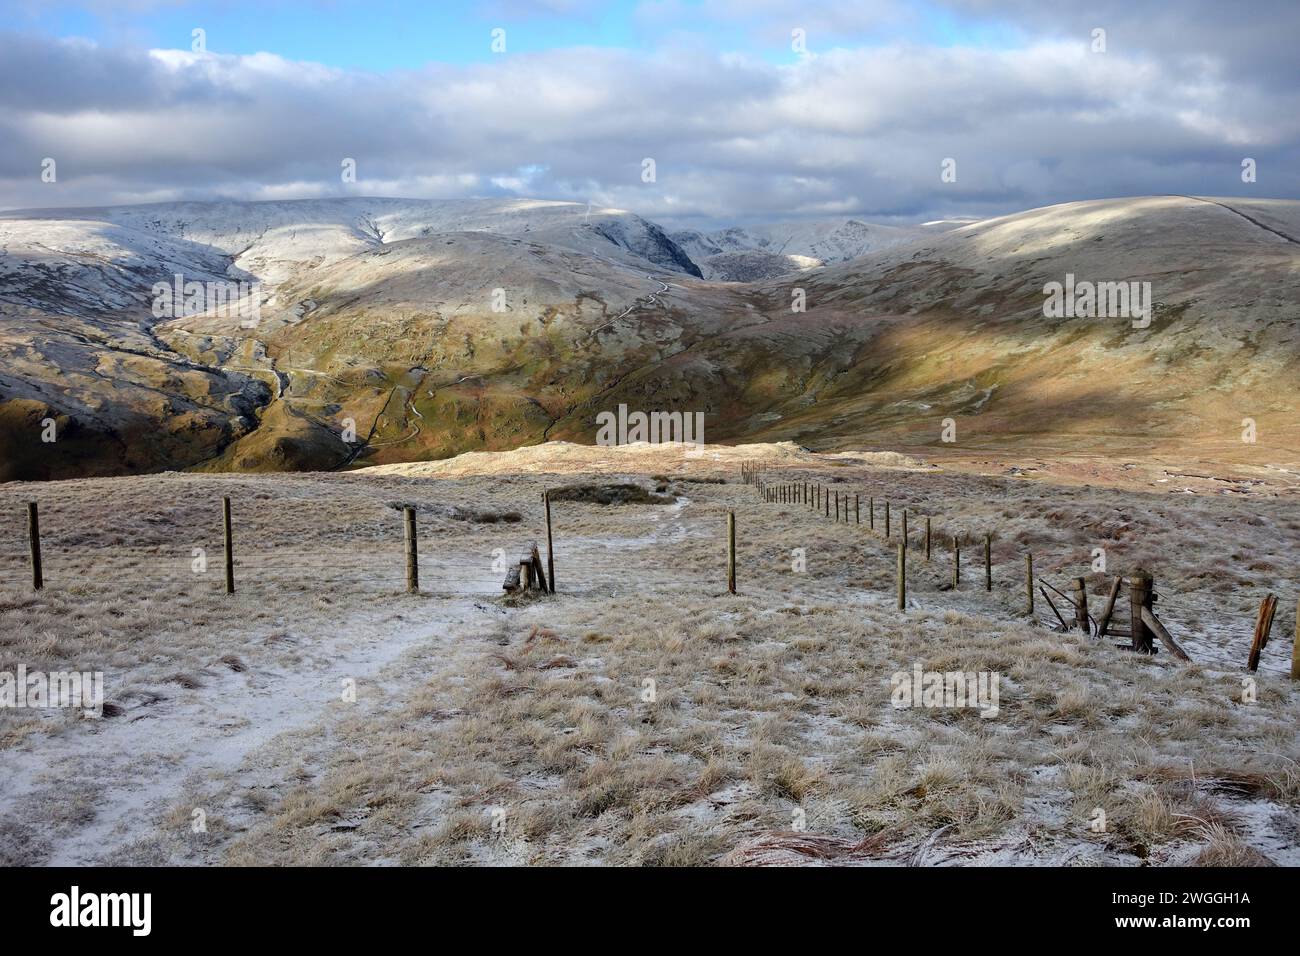 The 'High Street' Mountain Range and Wooden Stile in a Wire Fence  near the Summit of 'Tarn Crag' Lake District National Park, Cumbria, England, UK Stock Photo